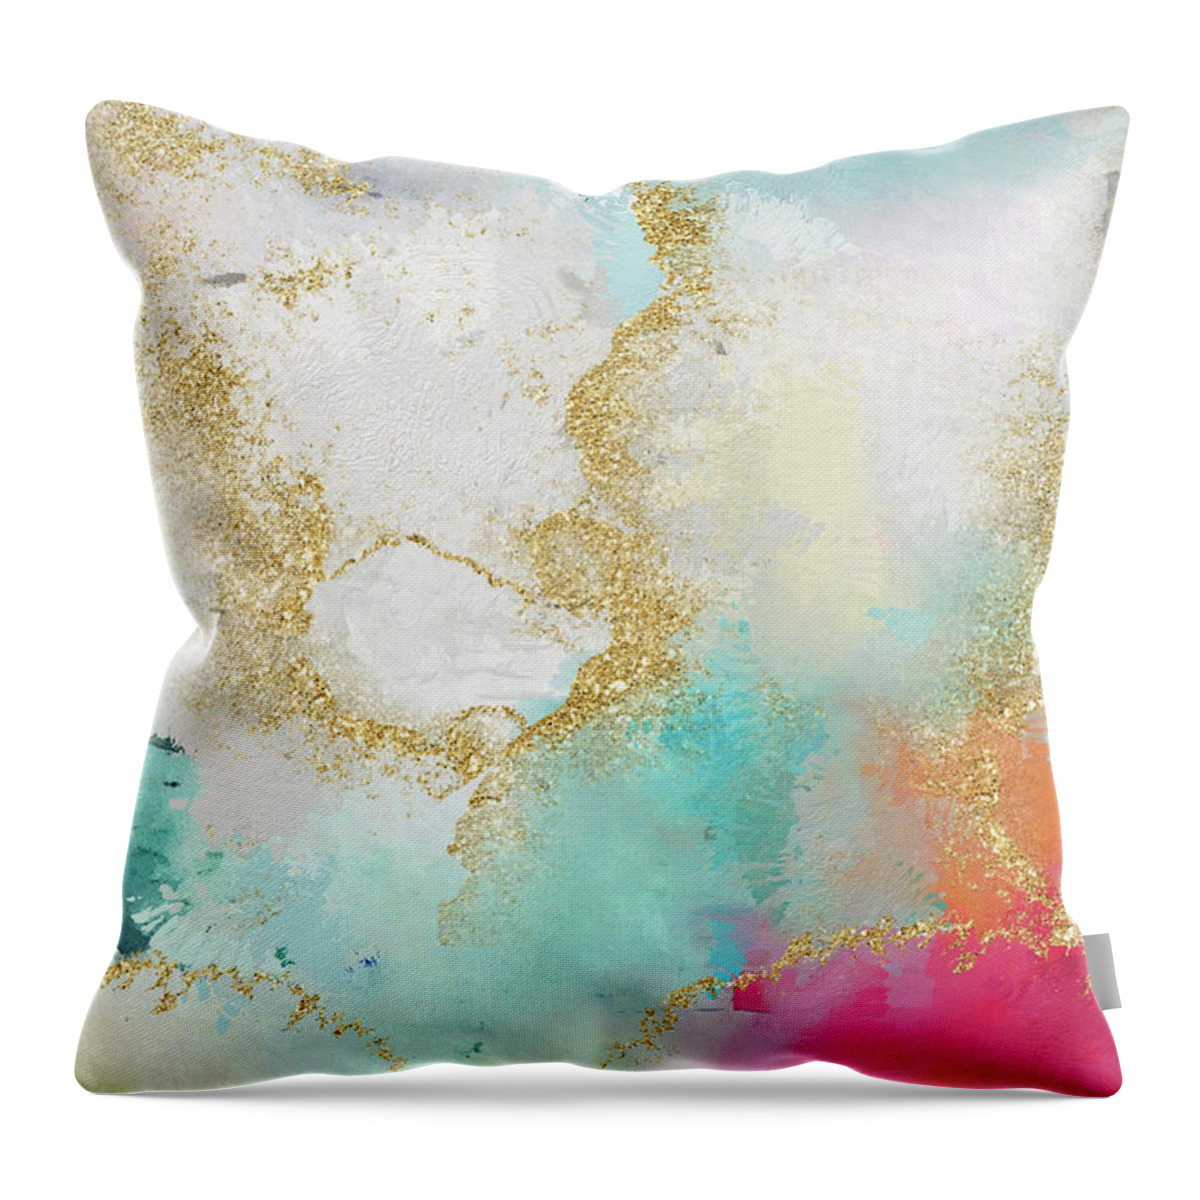 Watercolor Throw Pillow featuring the painting Seafoam Green, Pink And Gold by Modern Art